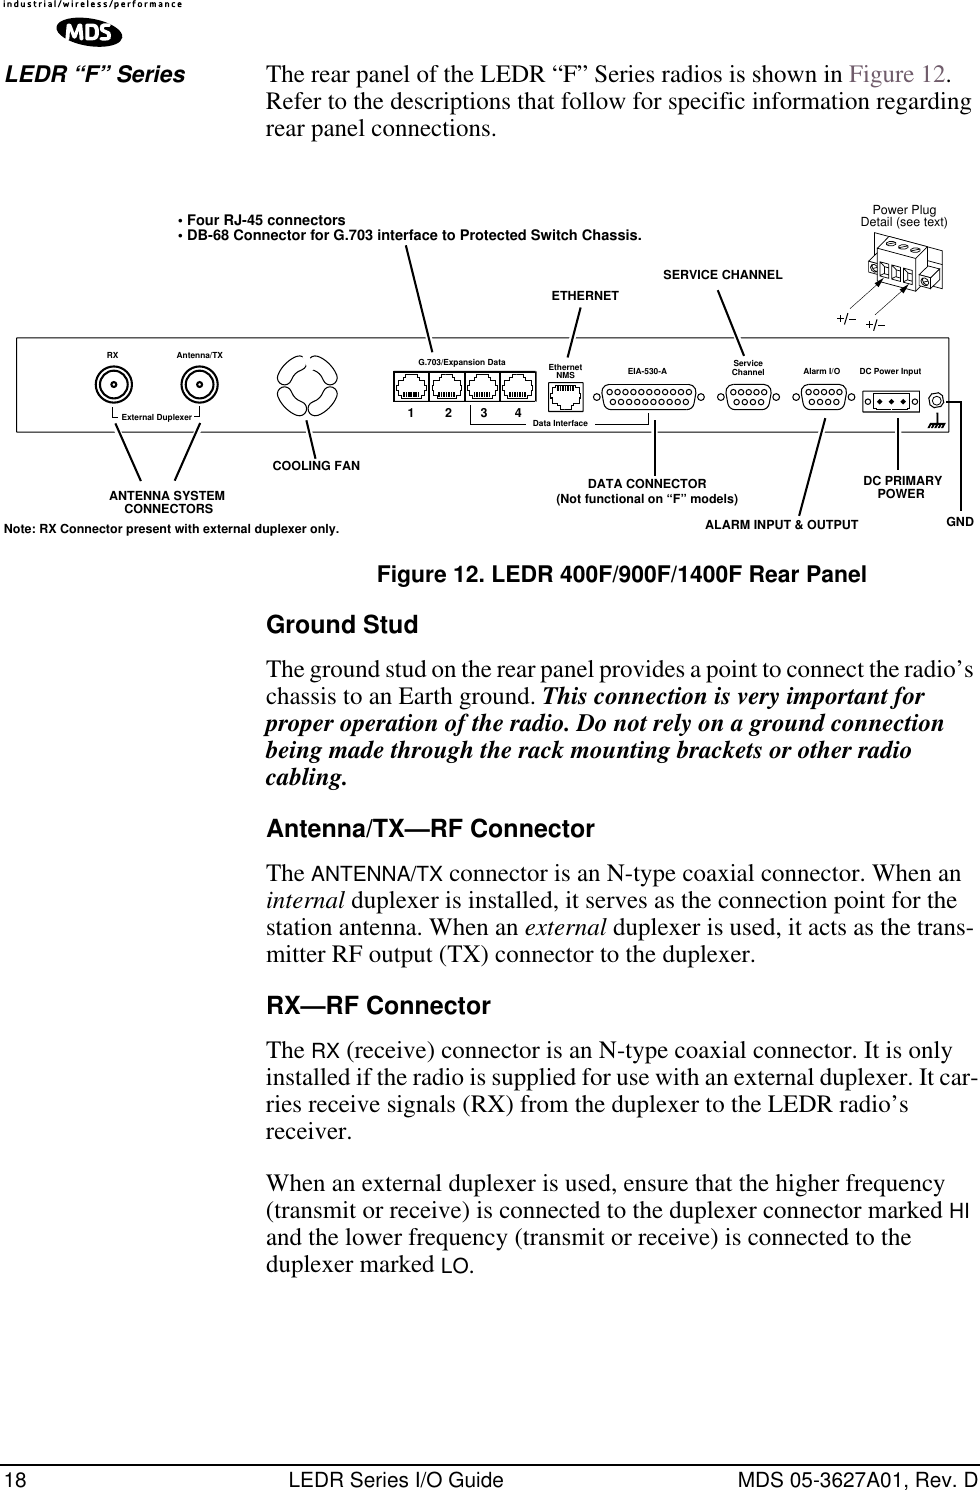 18 LEDR Series I/O Guide MDS 05-3627A01, Rev. DLEDR “F” Series The rear panel of the LEDR “F” Series radios is shown in Figure 12. Refer to the descriptions that follow for specific information regarding rear panel connections.Invisible place holderFigure 12. LEDR 400F/900F/1400F Rear PanelGround StudThe ground stud on the rear panel provides a point to connect the radio’s chassis to an Earth ground. This connection is very important for proper operation of the radio. Do not rely on a ground connection being made through the rack mounting brackets or other radio cabling.Antenna/TX—RF ConnectorThe ANTENNA/TX connector is an N-type coaxial connector. When an internal duplexer is installed, it serves as the connection point for the station antenna. When an external duplexer is used, it acts as the trans-mitter RF output (TX) connector to the duplexer. RX—RF ConnectorThe RX (receive) connector is an N-type coaxial connector. It is only installed if the radio is supplied for use with an external duplexer. It car-ries receive signals (RX) from the duplexer to the LEDR radio’s receiver.When an external duplexer is used, ensure that the higher frequency (transmit or receive) is connected to the duplexer connector marked HI and the lower frequency (transmit or receive) is connected to the duplexer marked LO.Antenna/TXExternal DuplexerRX G.703/Expansion Data EIA-530-AEthernetNMSData InterfaceServiceChannel Alarm I/O DC Power InputPower PlugDetail (see text)COOLING FANETHERNETSERVICE CHANNELALARM INPUT &amp; OUTPUTDC PRIMARYANTENNA SYSTEM Note: RX Connector present with external duplexer only.CONNECTORS POWER • Four RJ-45 connectors• DB-68 Connector for G.703 interface to Protected Switch Chassis.GND DATA CONNECTOR(Not functional on “F” models)1342